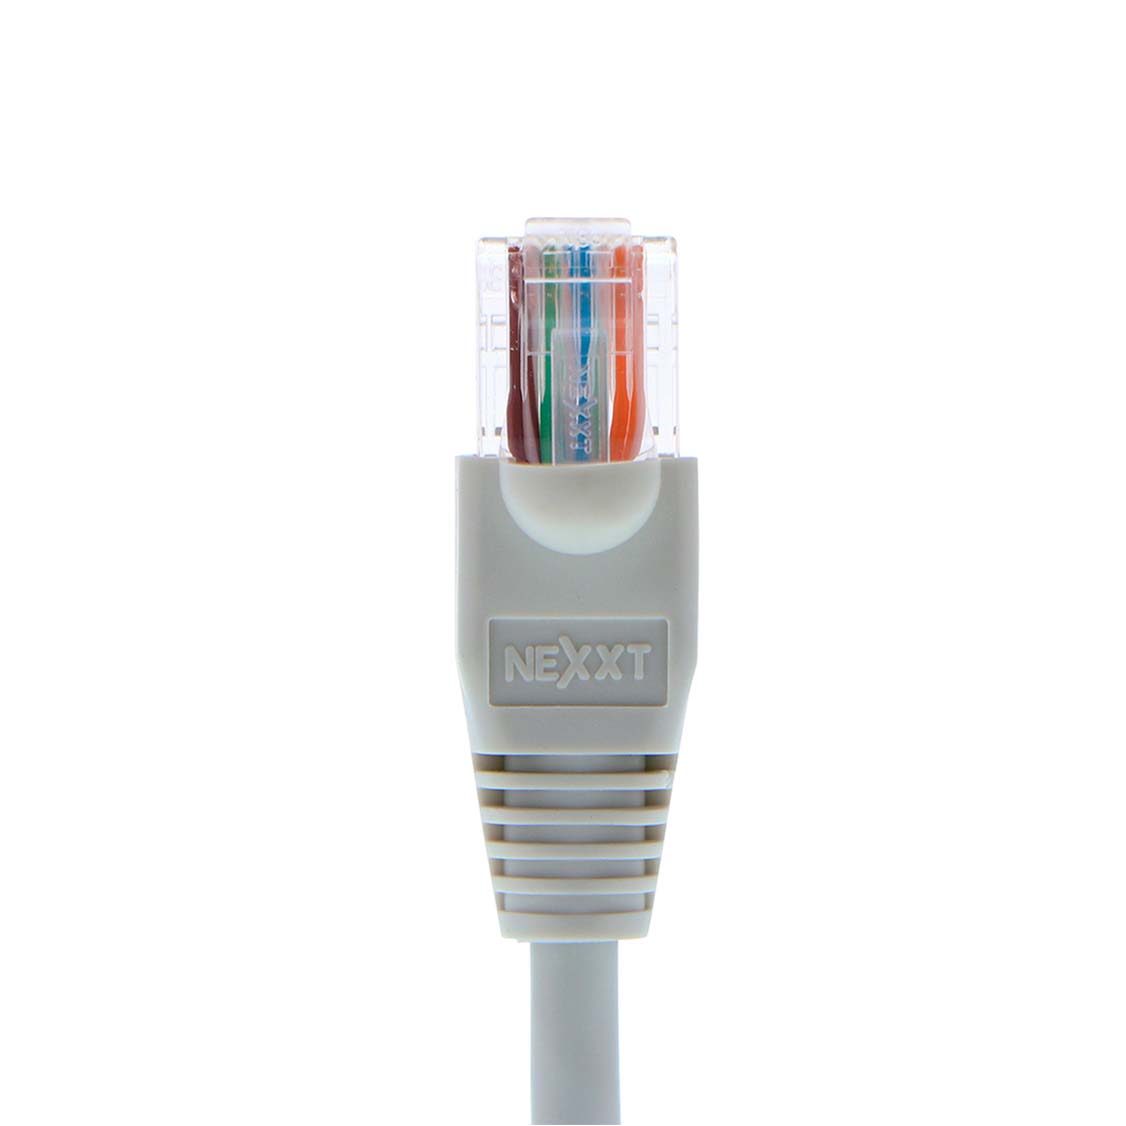 EXT. PATCH CORD CAT5E 10 PIES GRIS NEXXT AB360NXT23